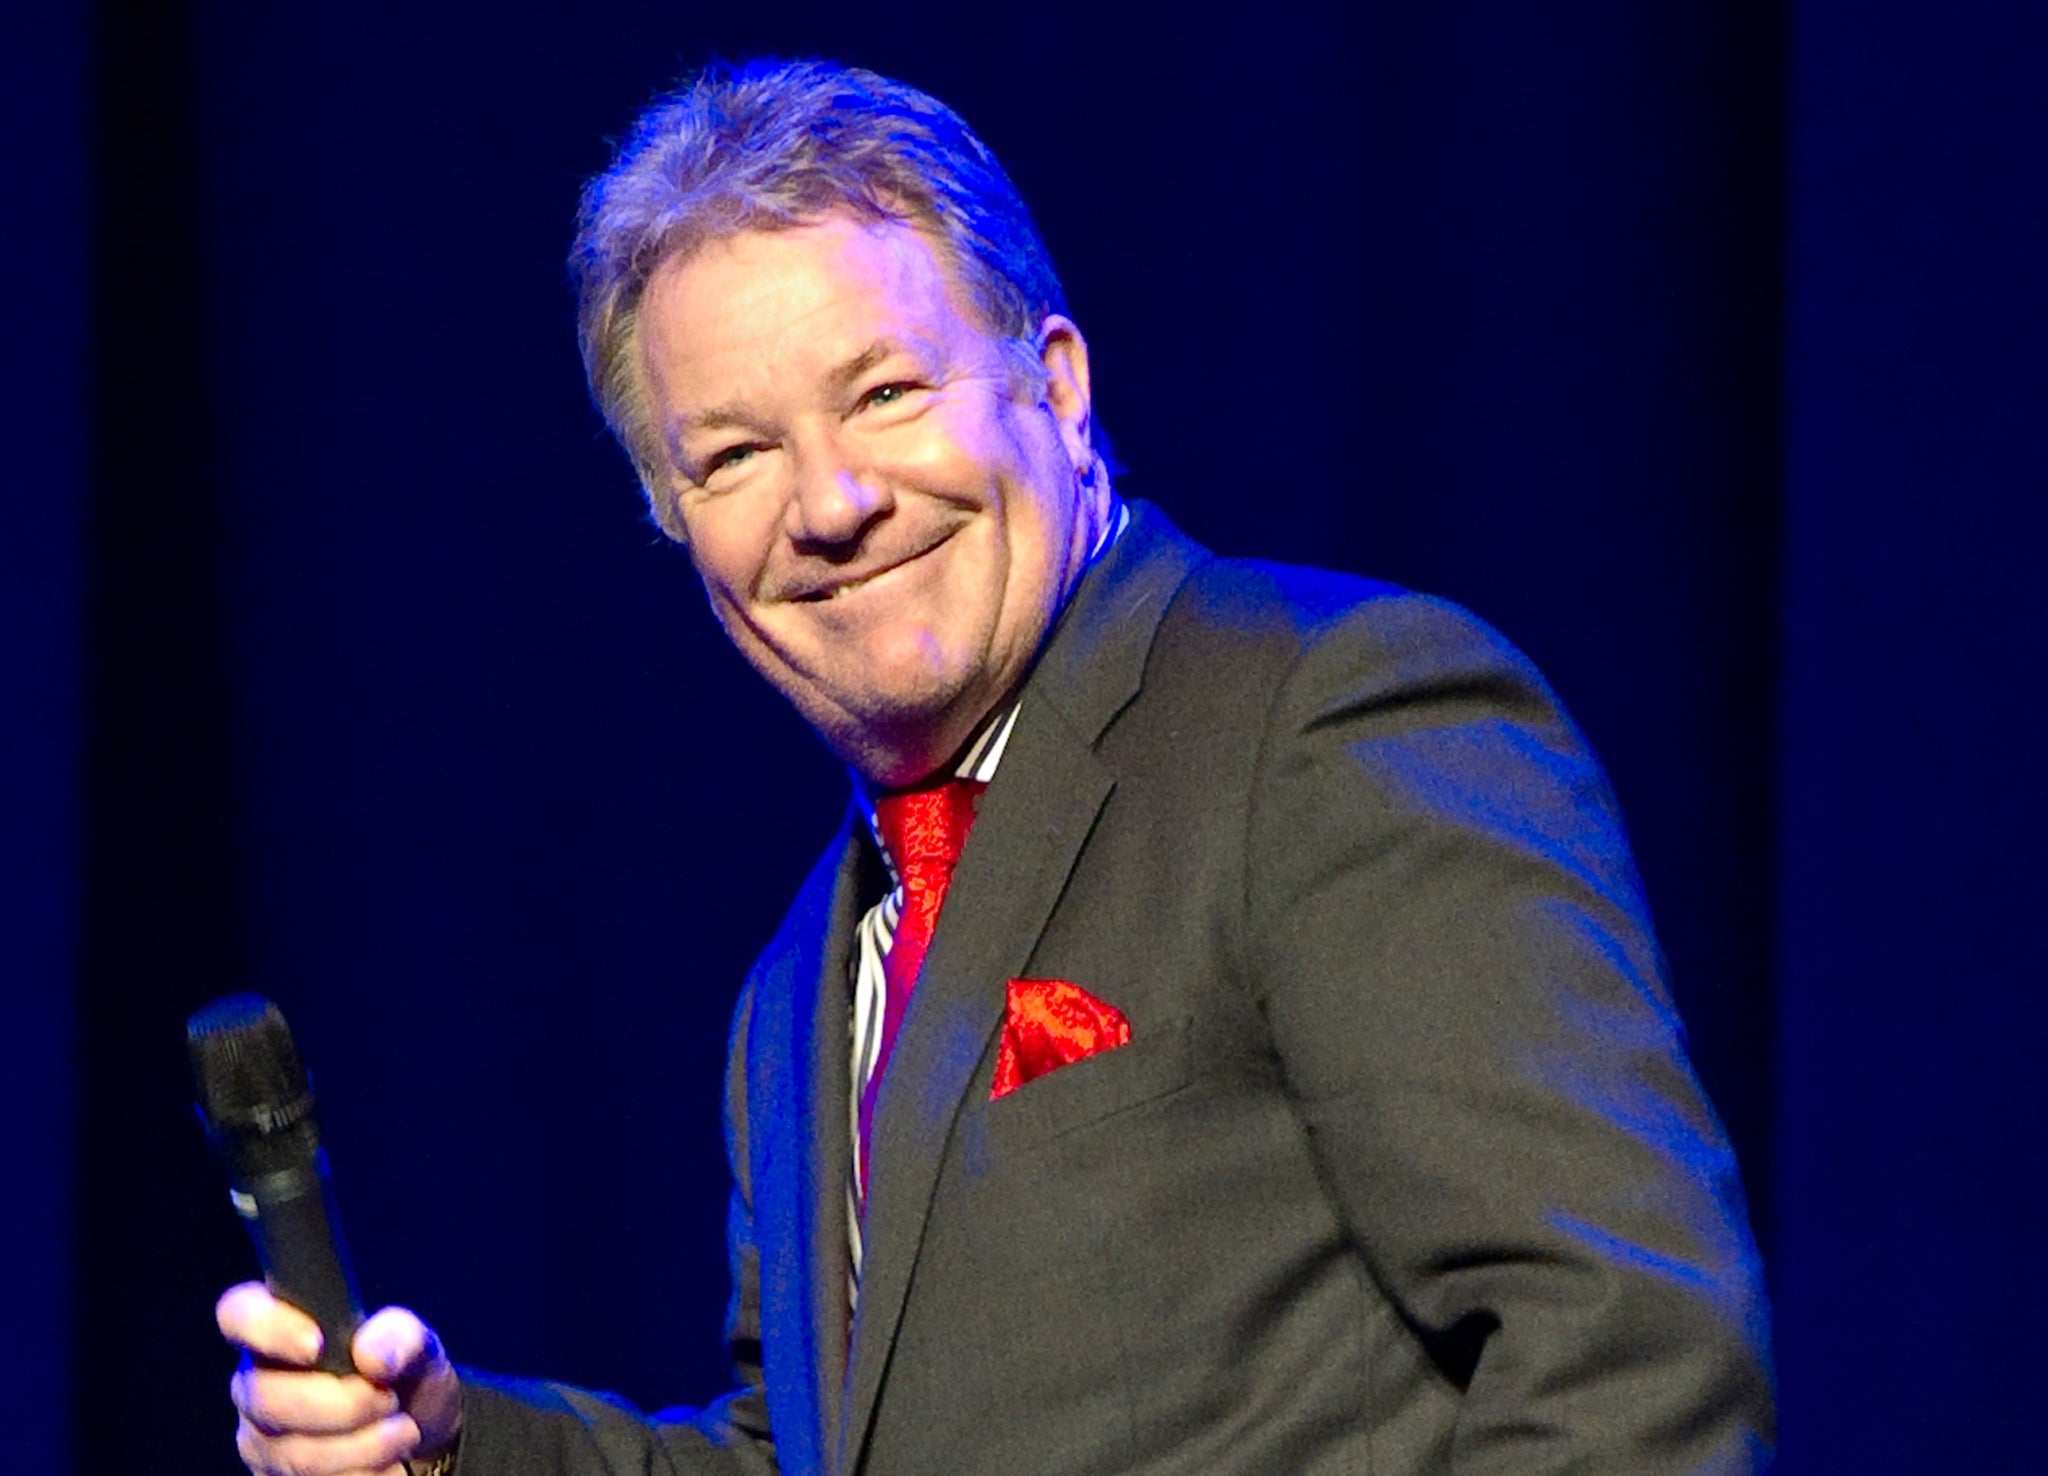 Jim Davidson has expressed his love of Top Gear